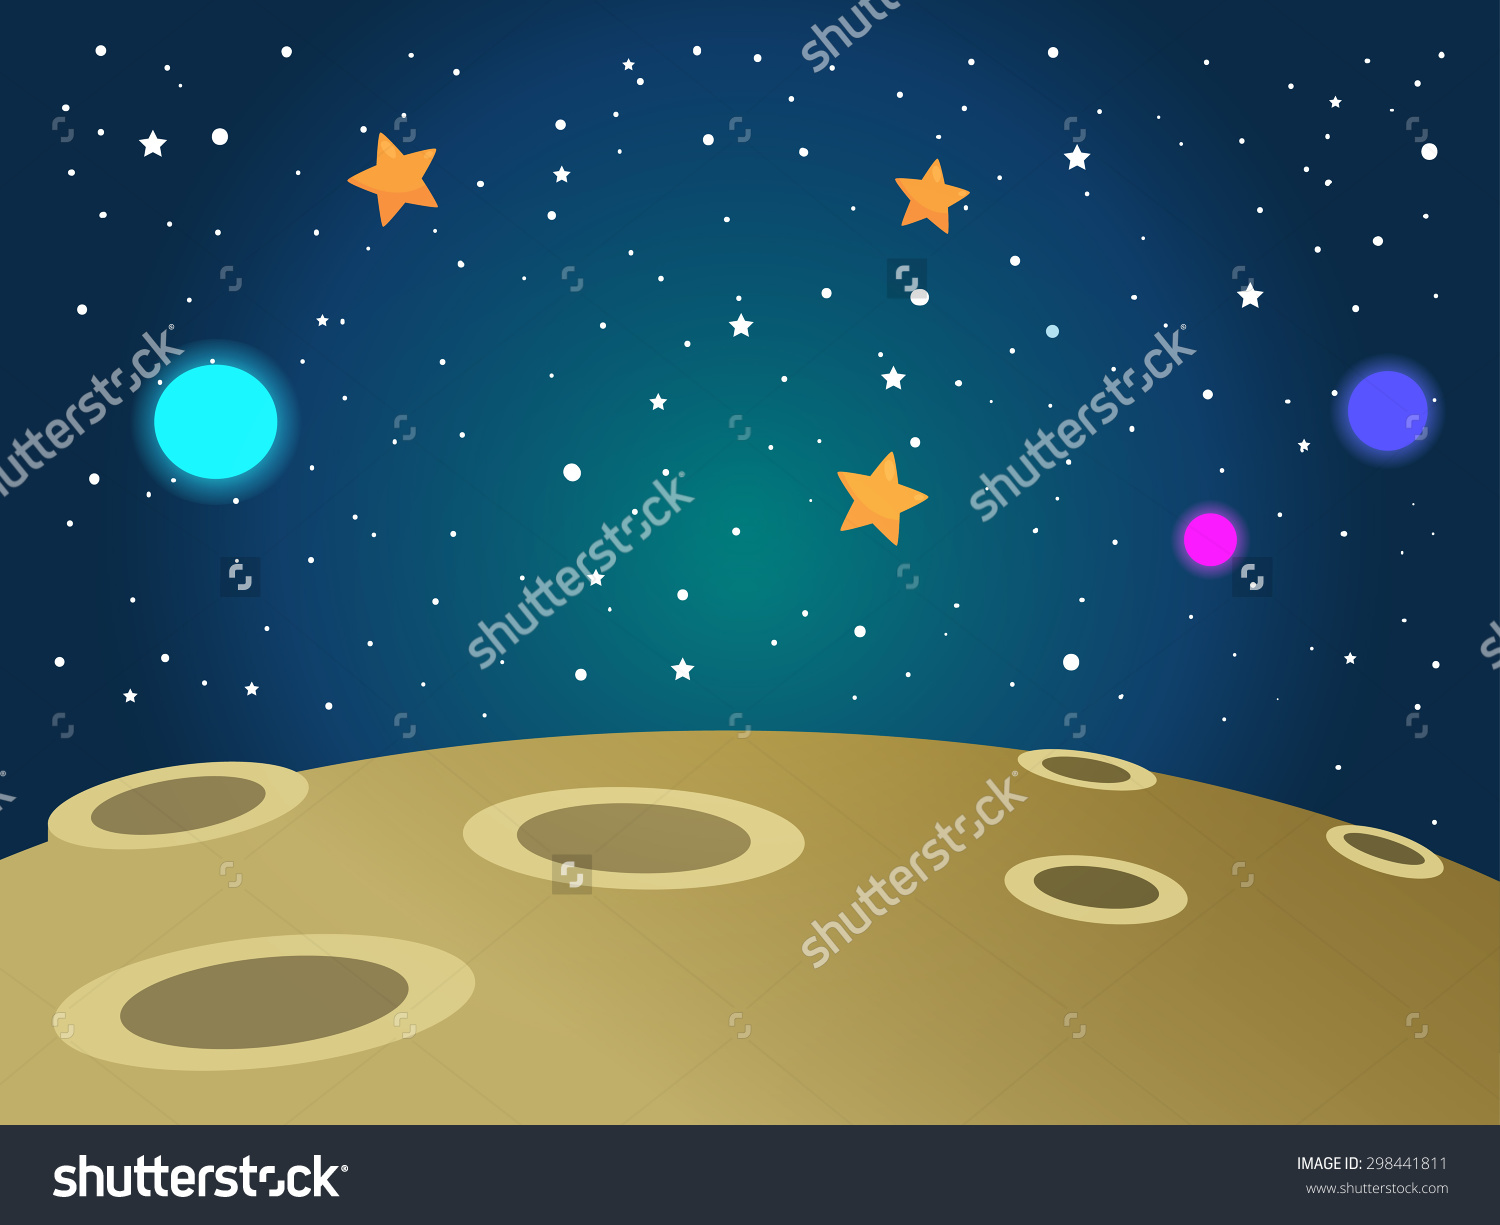 Background clipart outer space, Background outer space